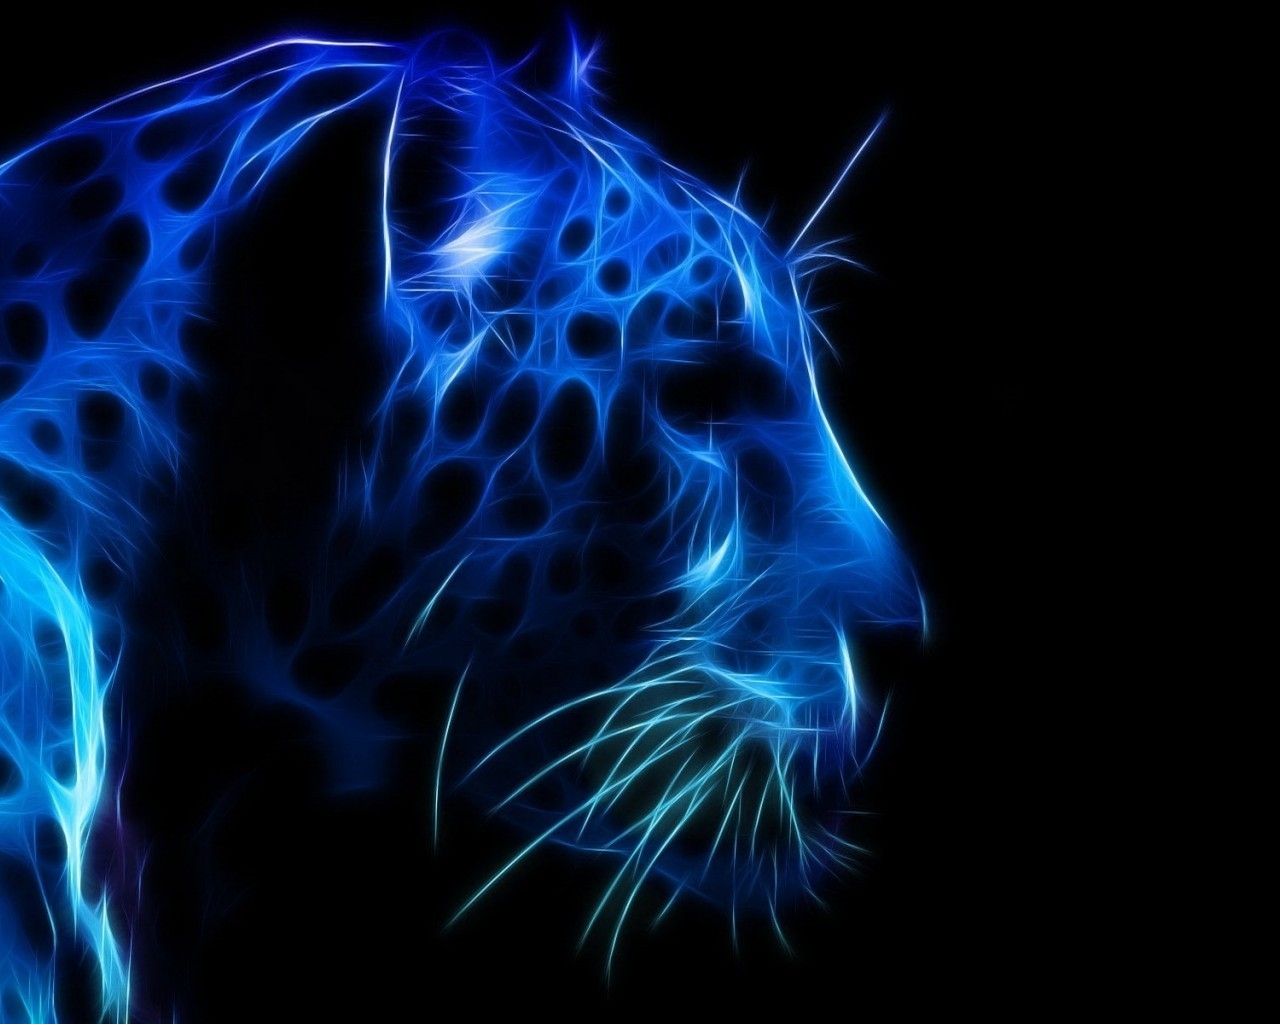 Leopard Profile Face for 1280 x 1024 resolution